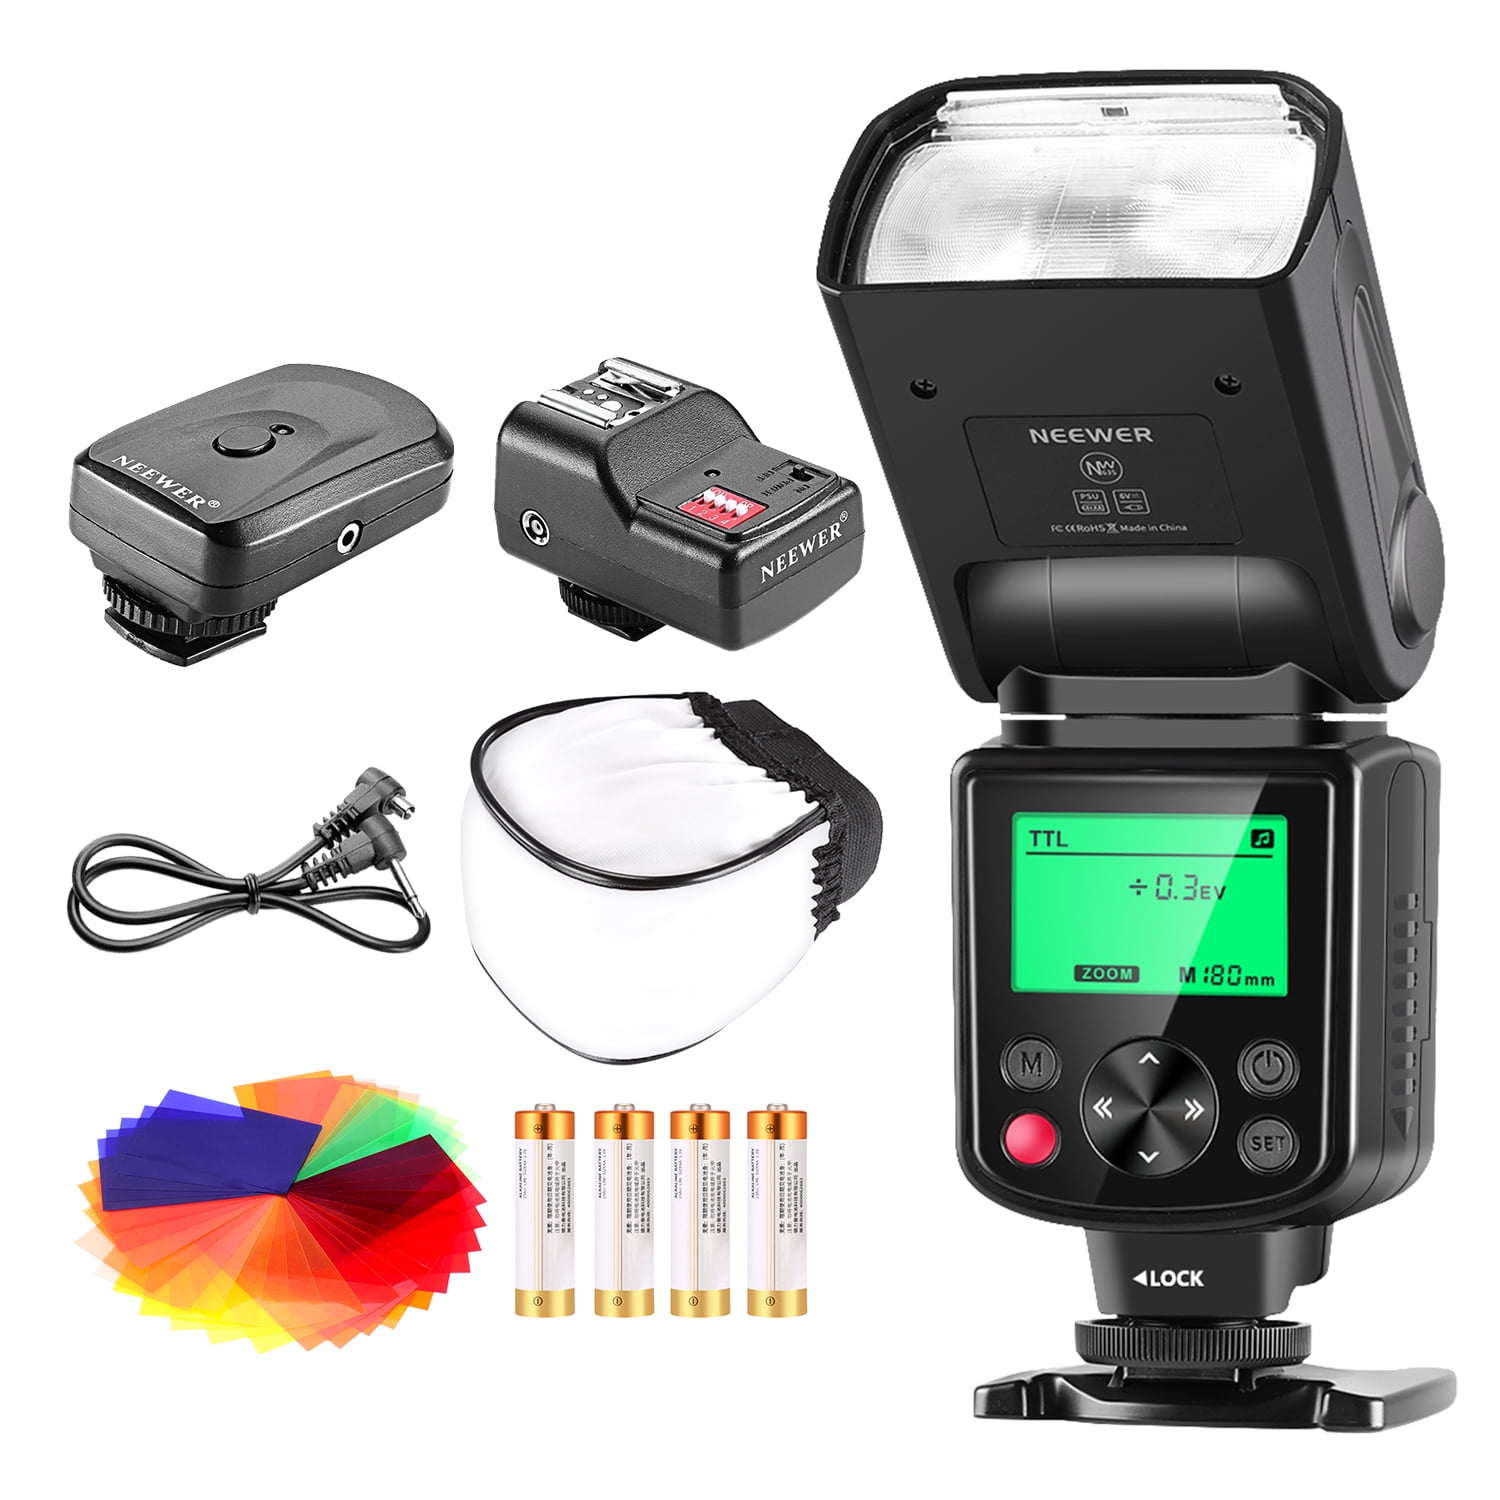 Neewer 750II TTL Flash Kit for Nikon D7200 D7100 D7000 D5500 D5300 D5200 D5100 D5000 D3300 D3200 D3100 D3000 D700 D500 D90 D80 D70 D60 D50 Cameras with Wireless Trigger，Color Filters,